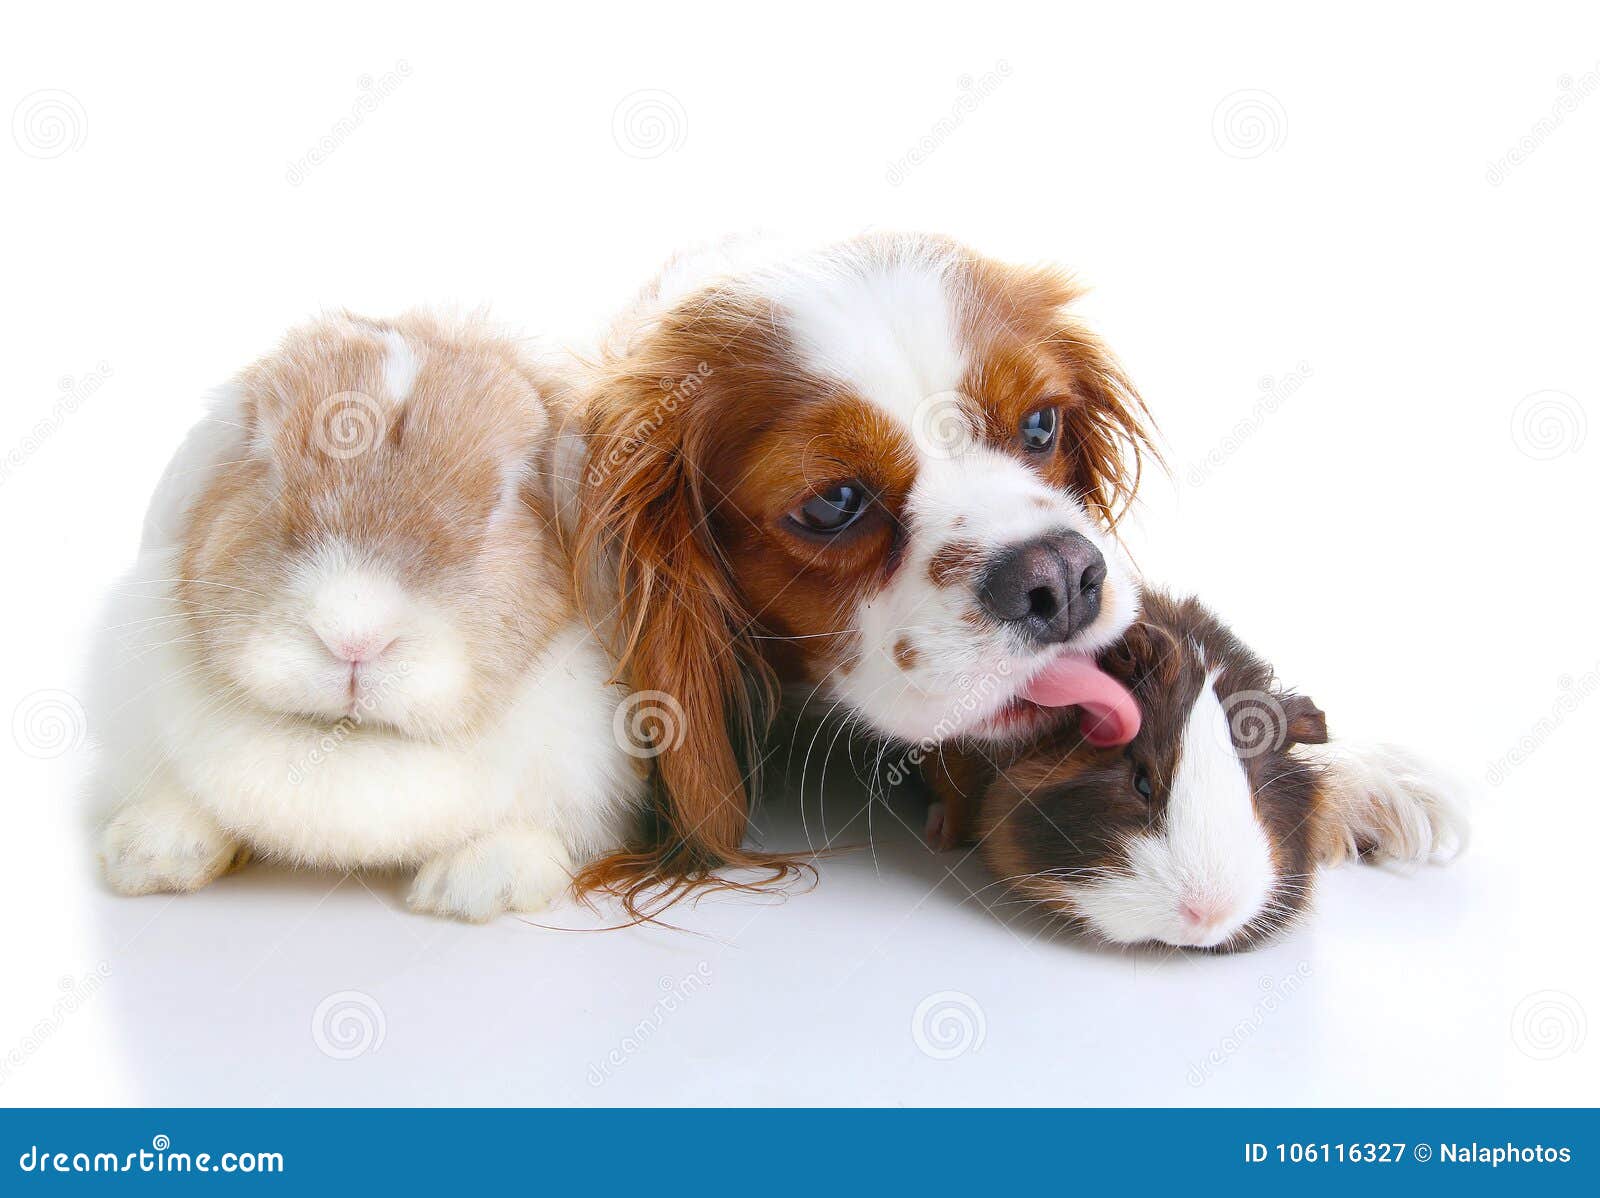 79,317 Animal Friends Stock Photos - Free & Royalty-Free Stock Photos from  Dreamstime